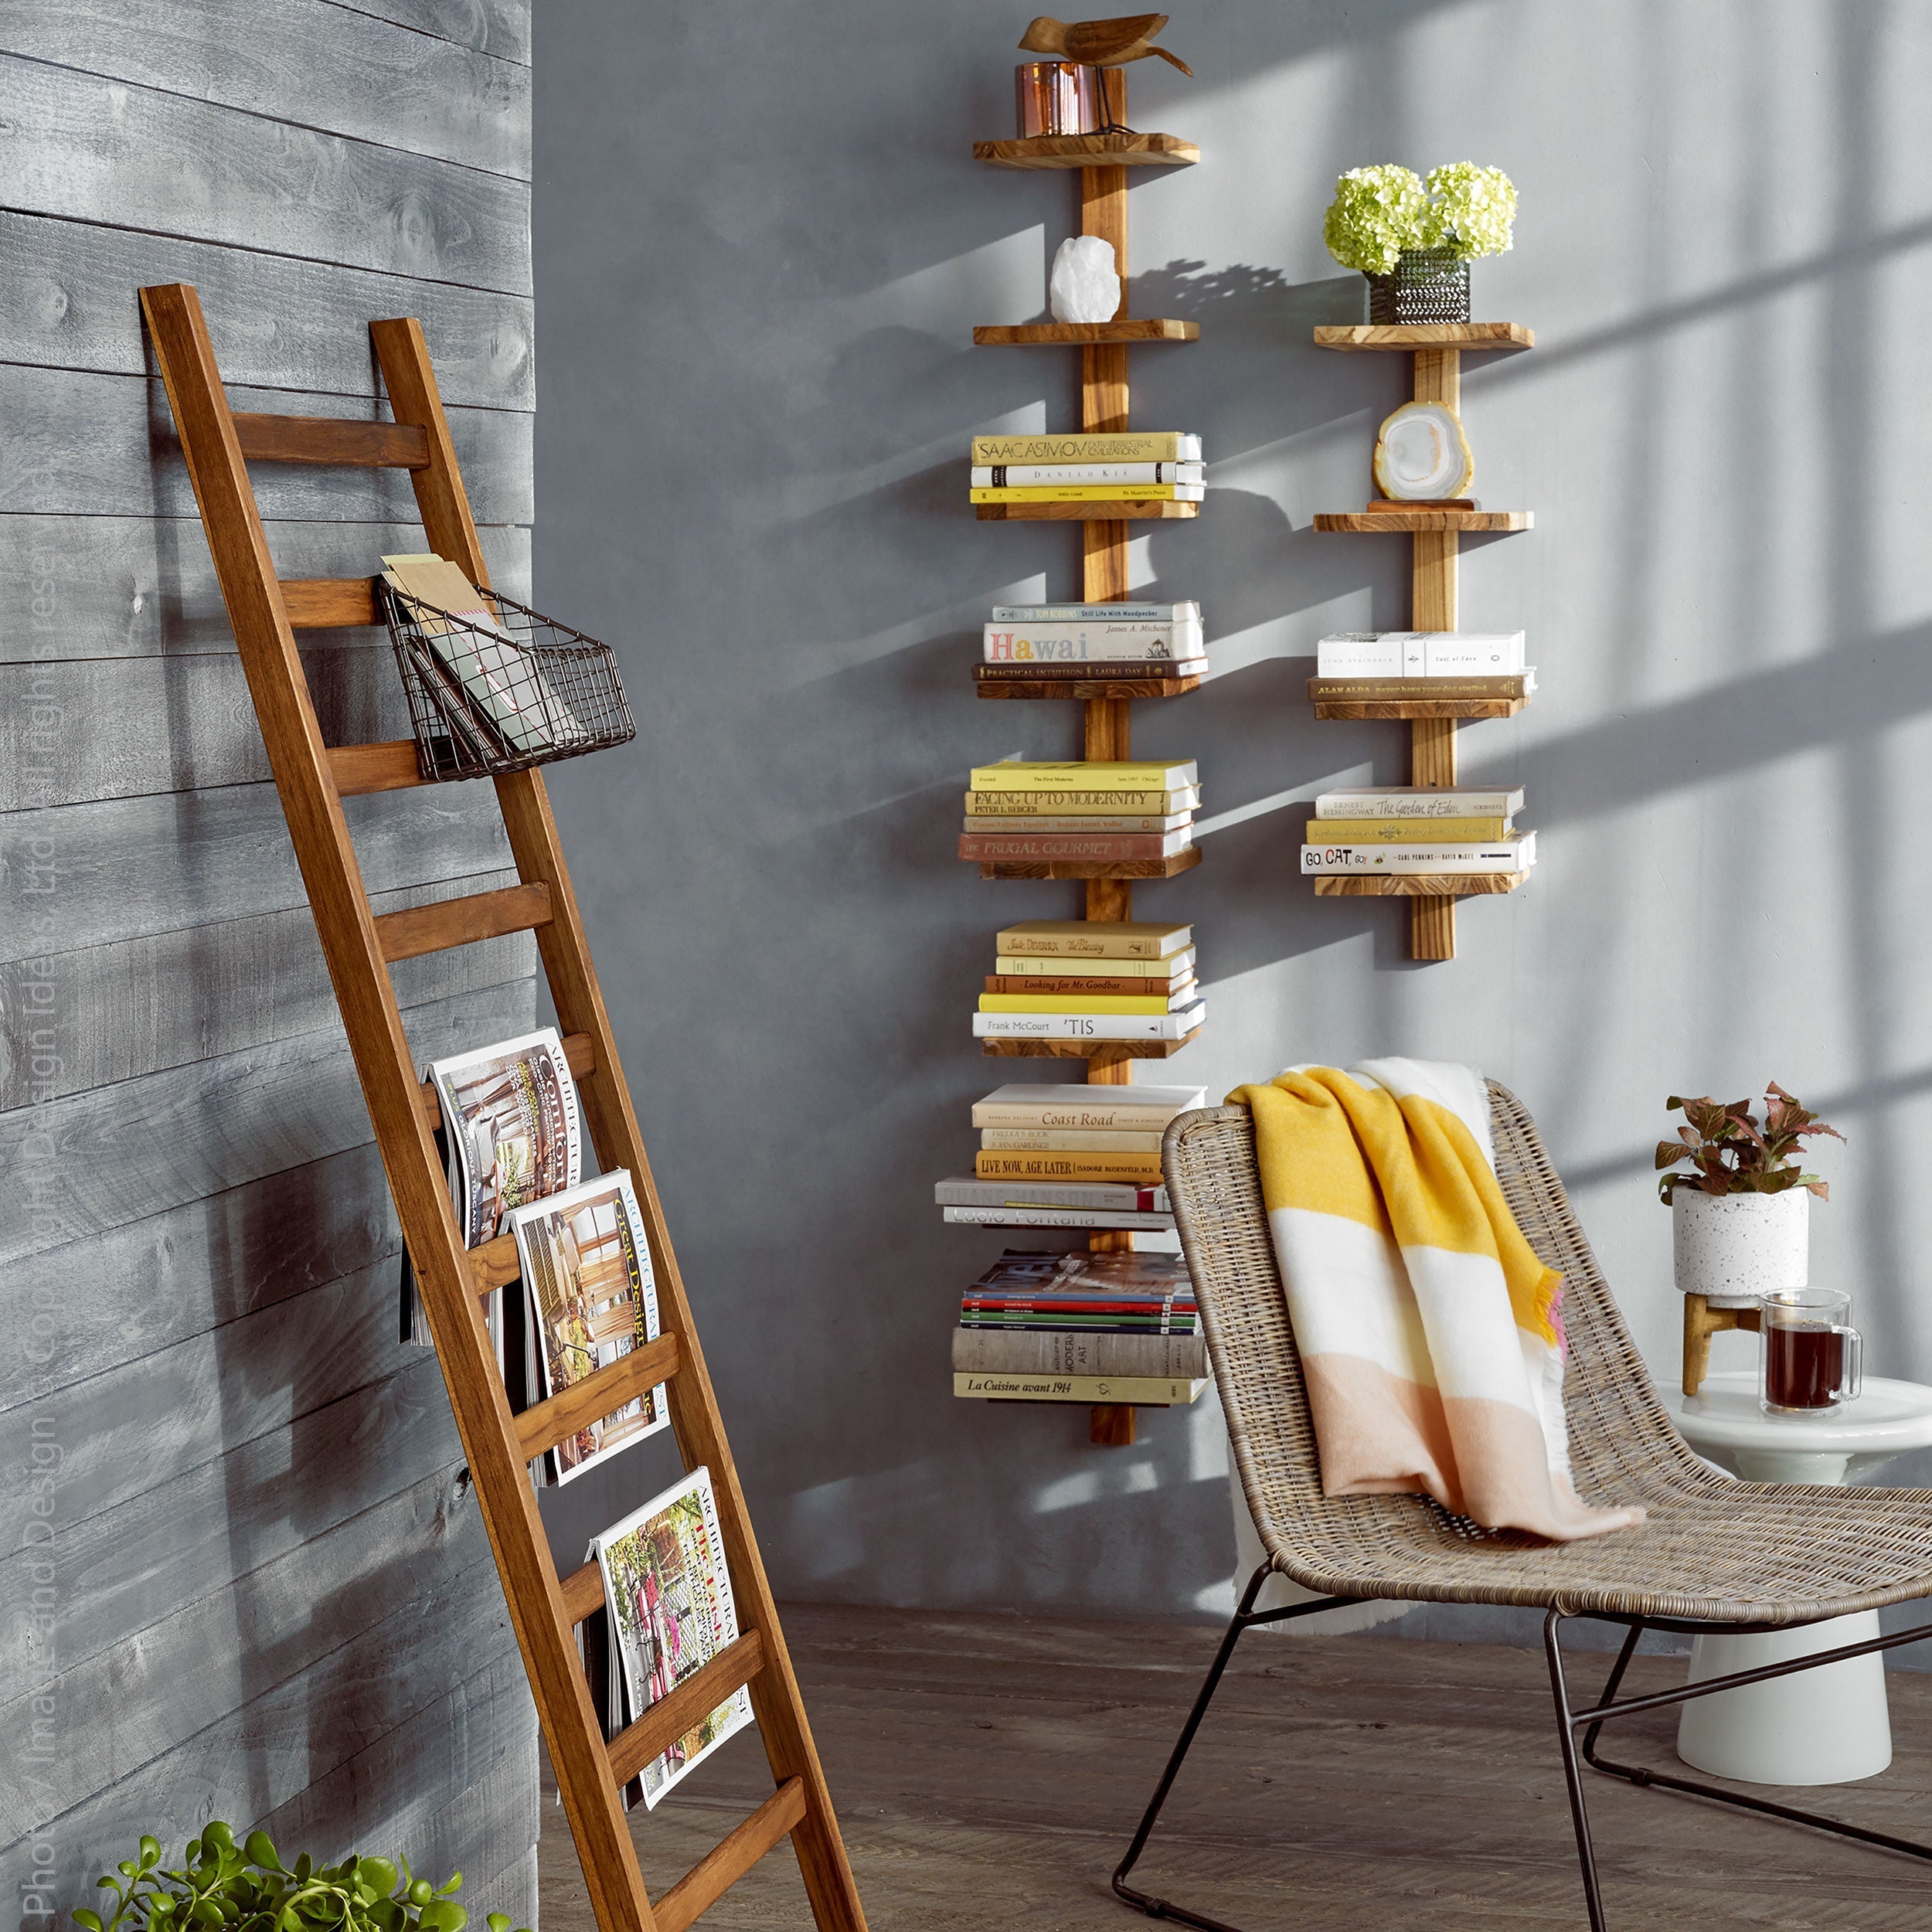 Takara Teak Ladder Black Color | Image 4 | From the Takara Collection | Masterfully handmade with natural teak for long lasting use | This ladder is sustainably sourced | Available in natural color | texxture home